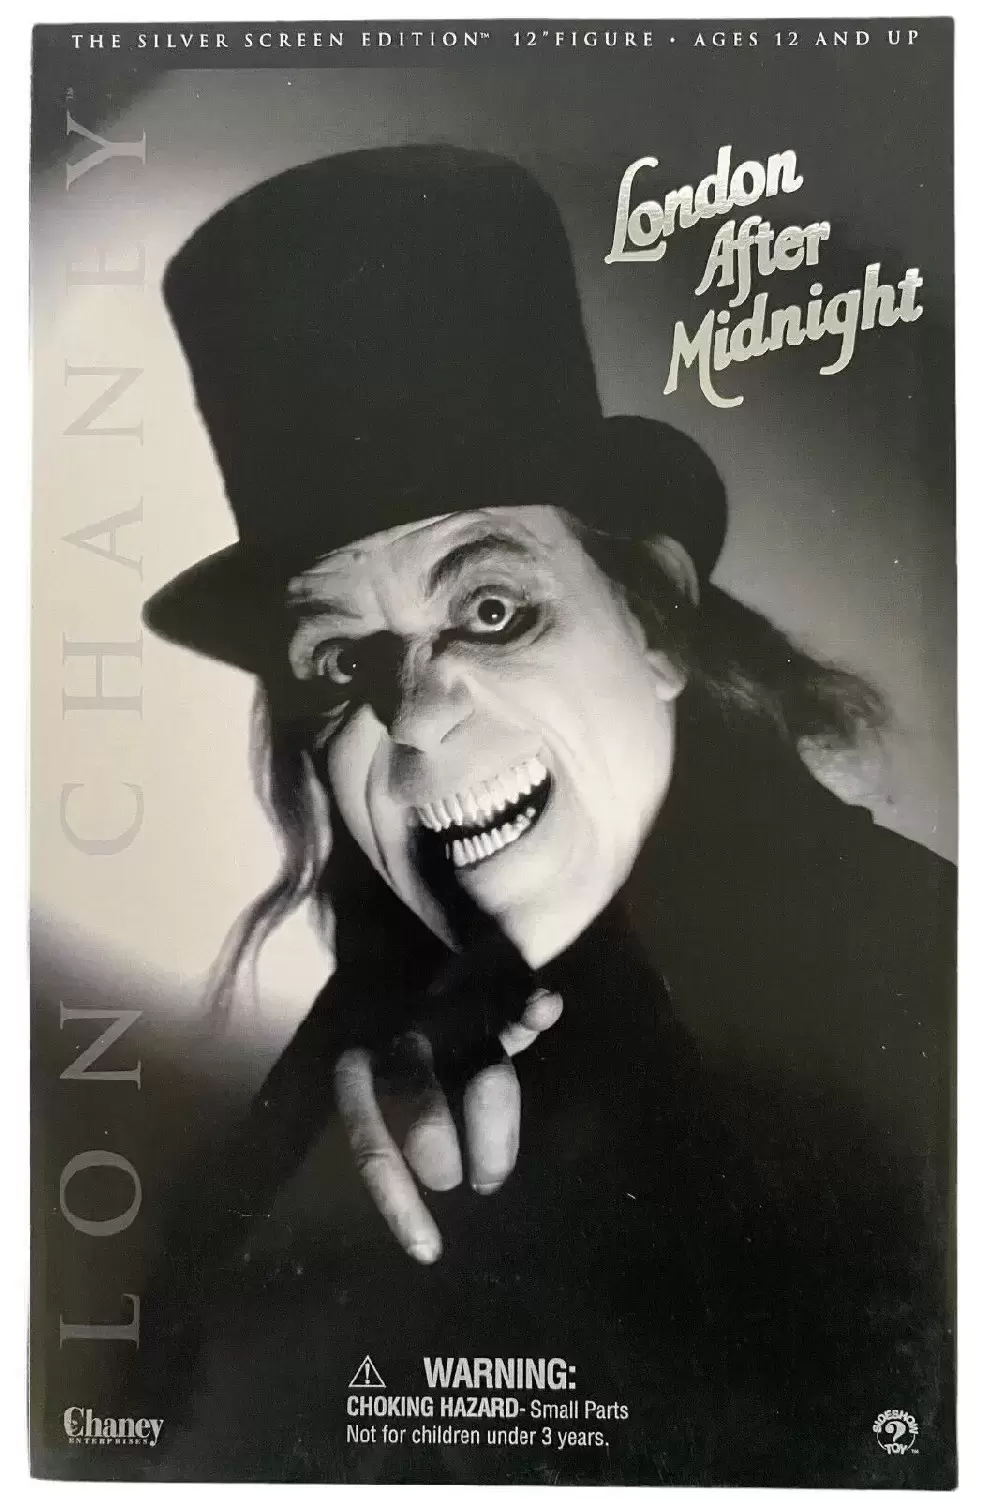 Sideshow - London After Midnight - Lon Chanley 12” Silver Screen Edition